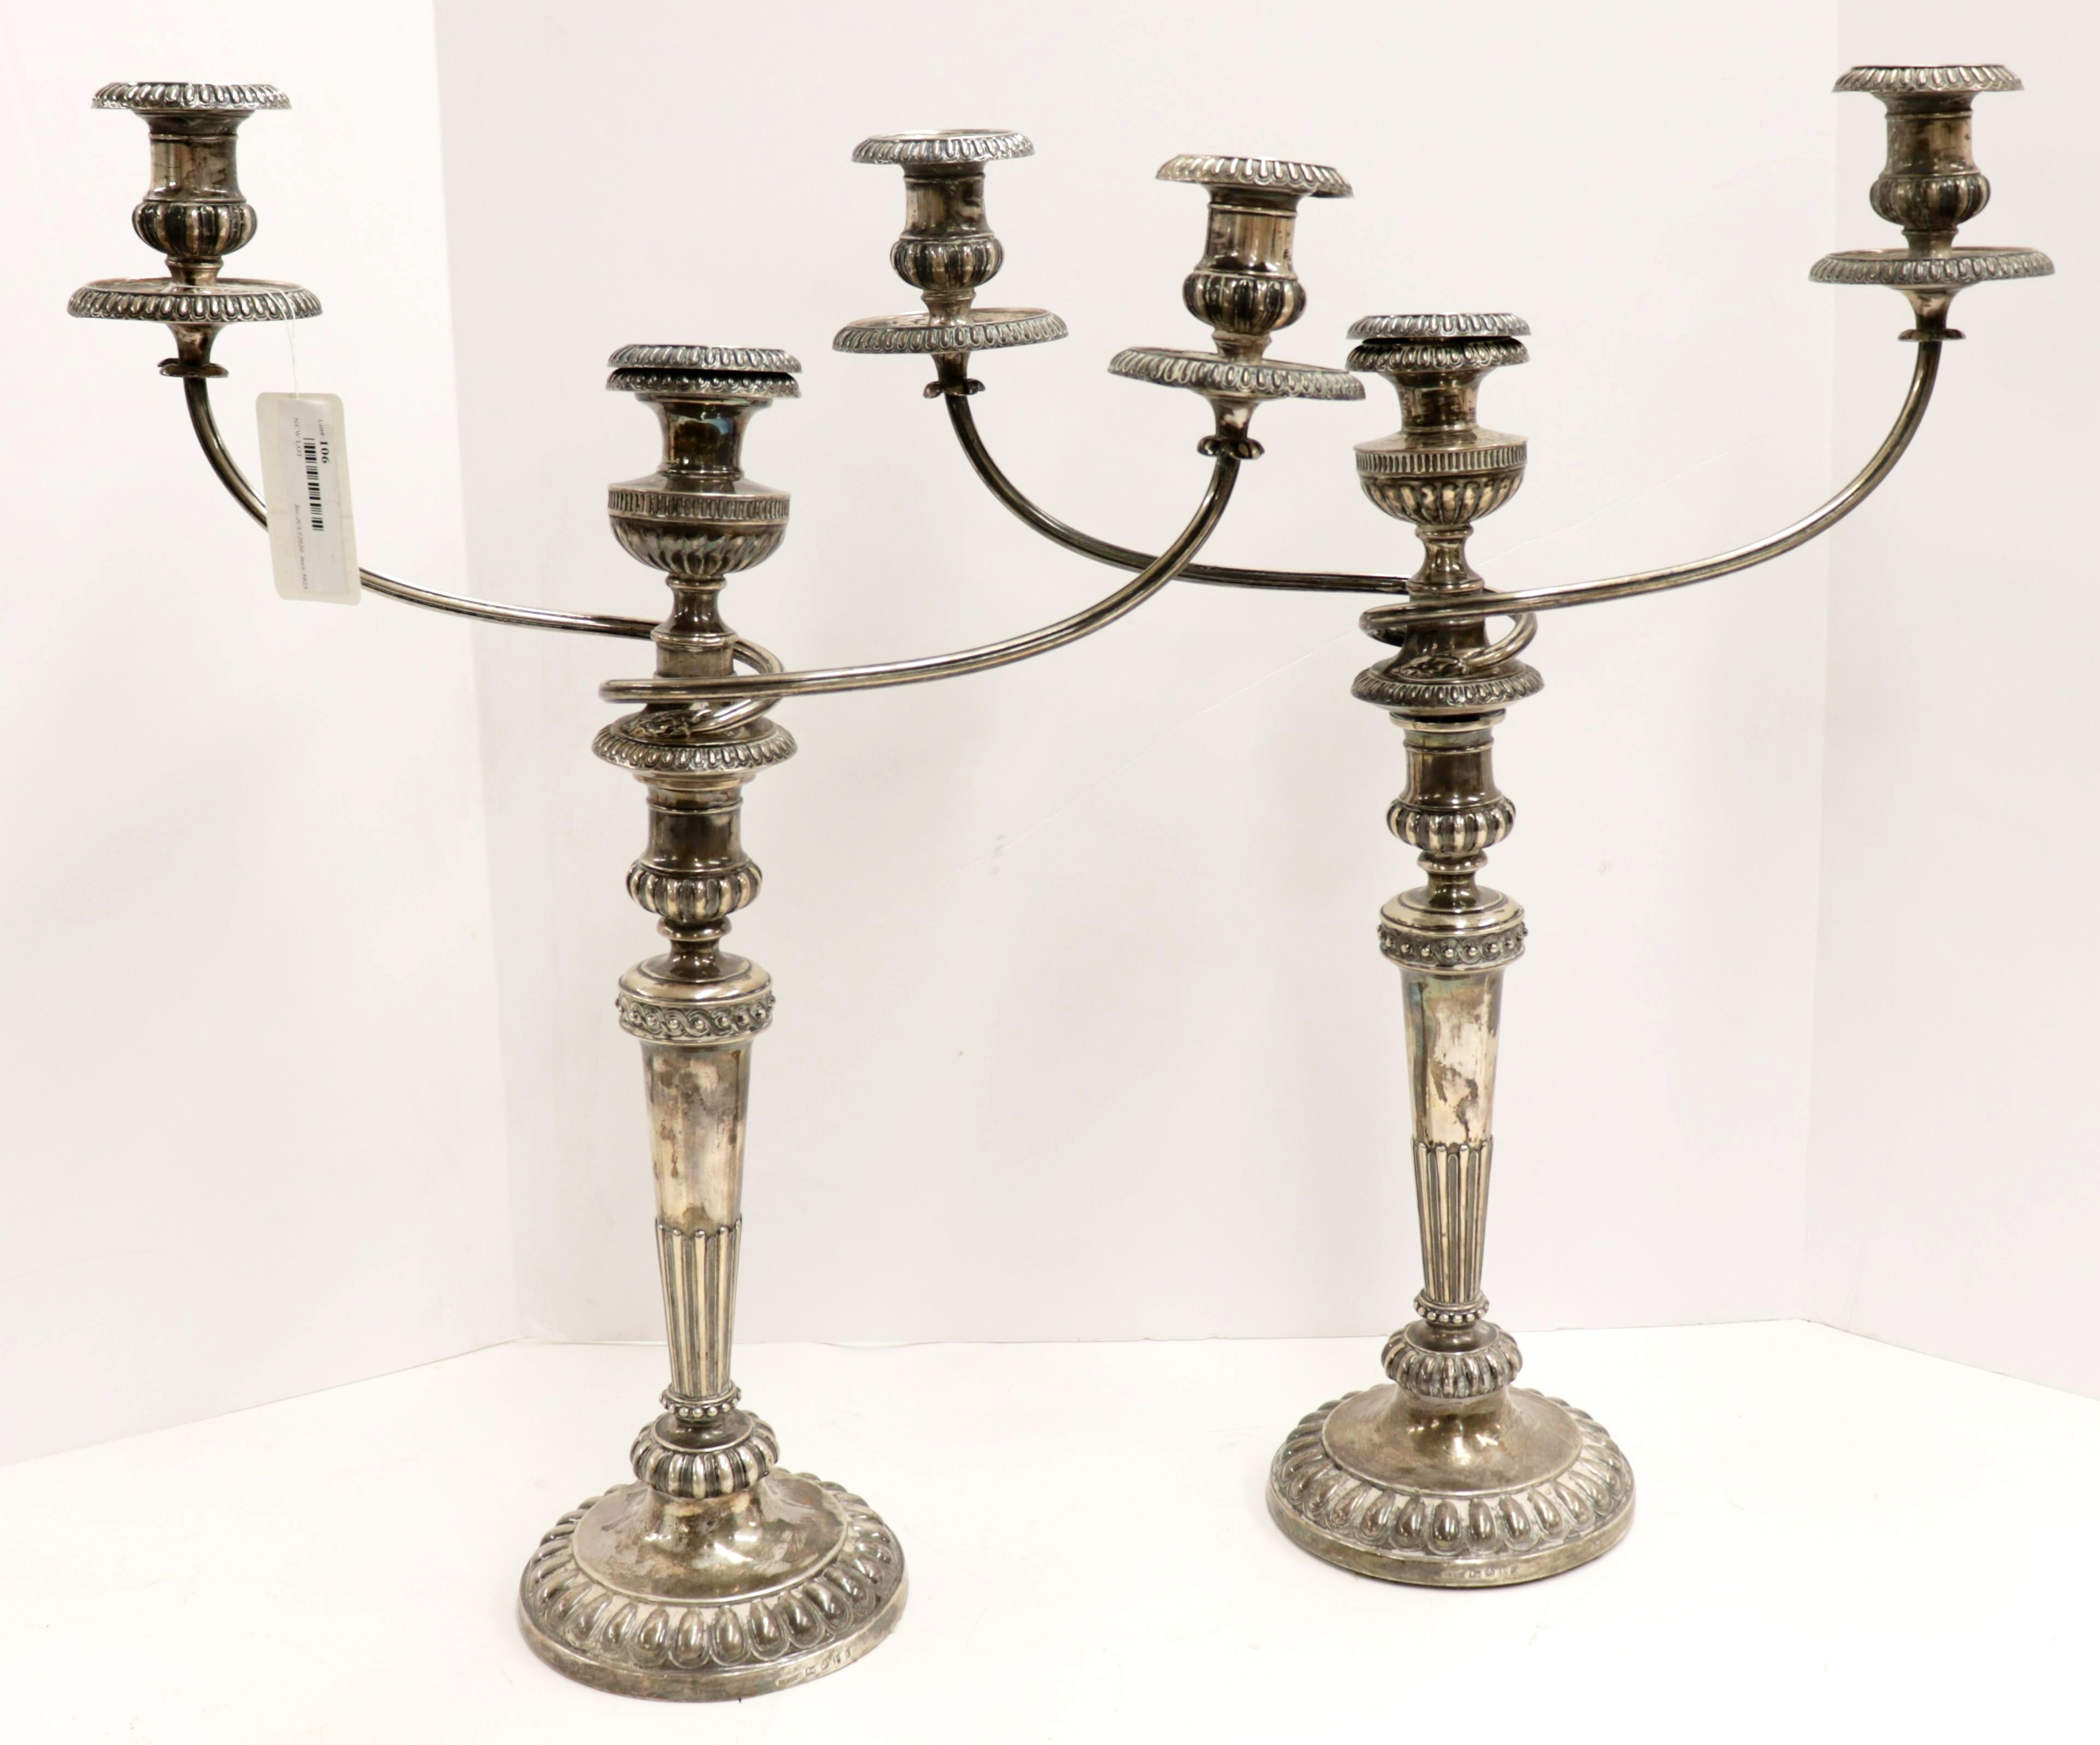 Pr George III English Silver Candelabra, 1790. Sold For $3,640